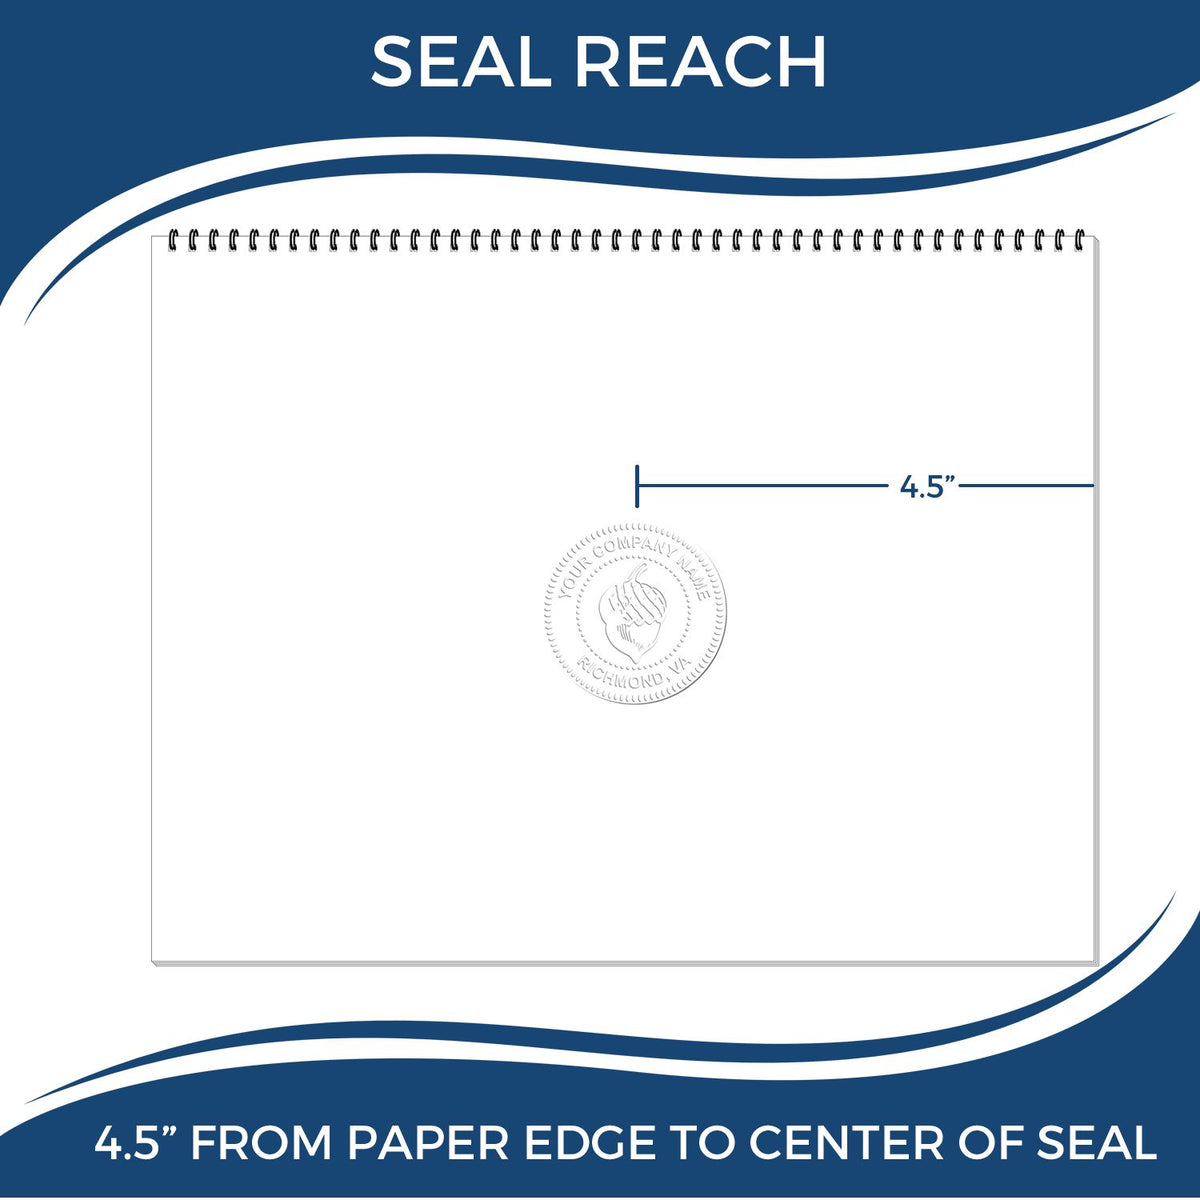 An infographic showing the seal reach which is represented by a ruler and a miniature seal image of the State of Connecticut Extended Long Reach Geologist Seal